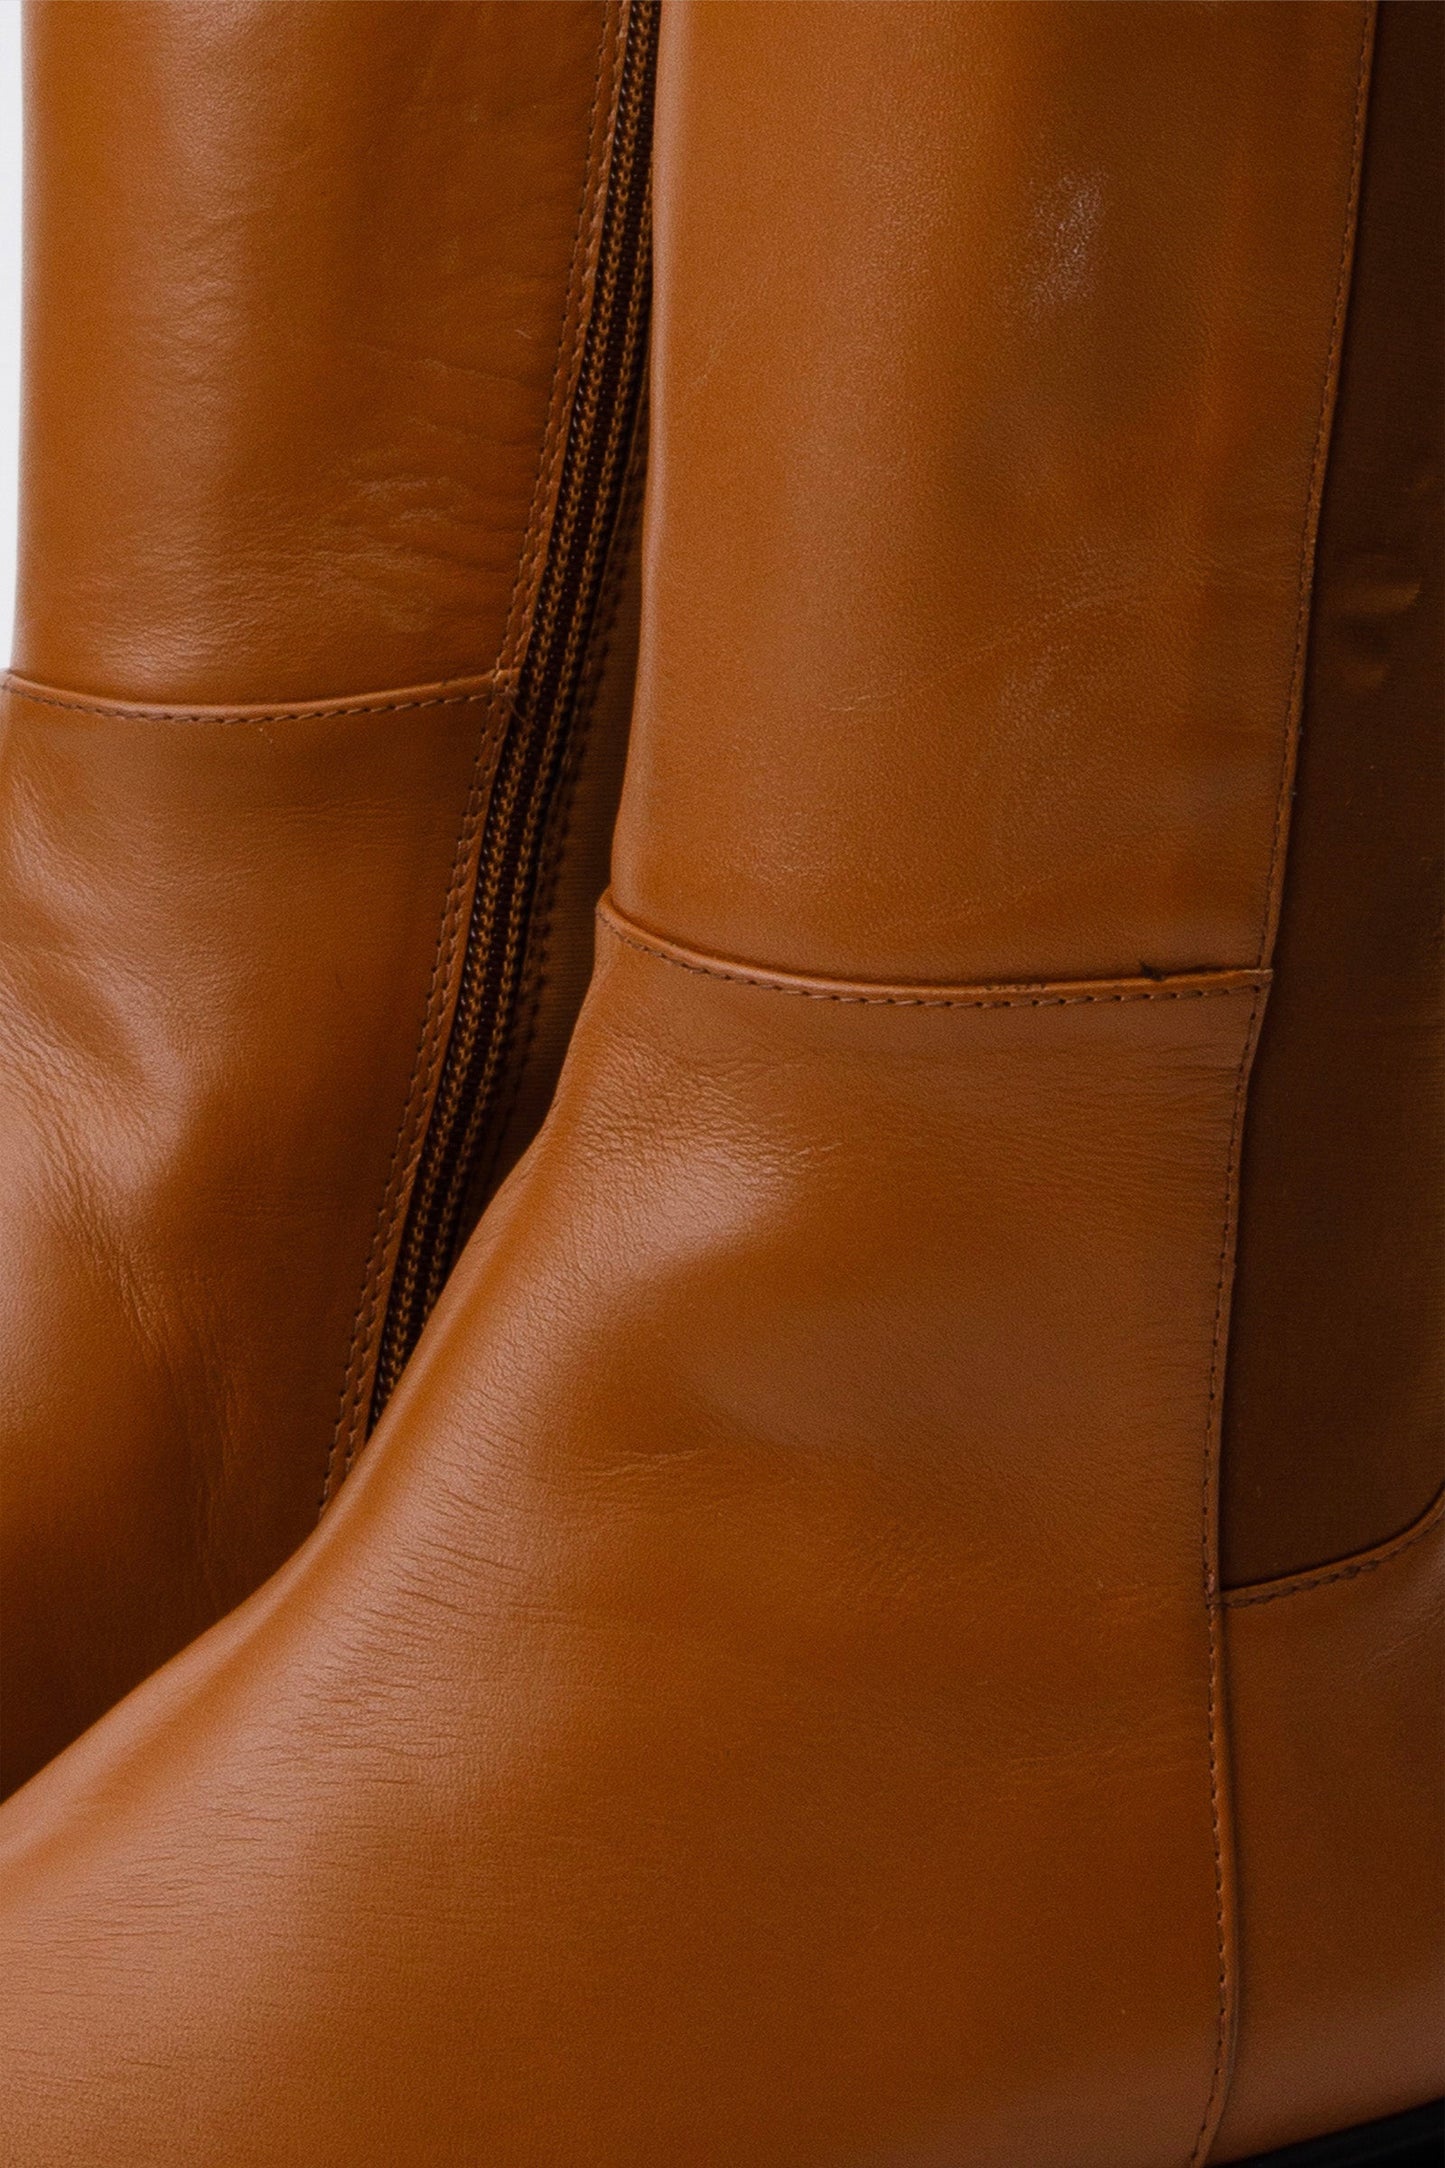 The  Harmony Belle Tan Leather Knee High Women Boot